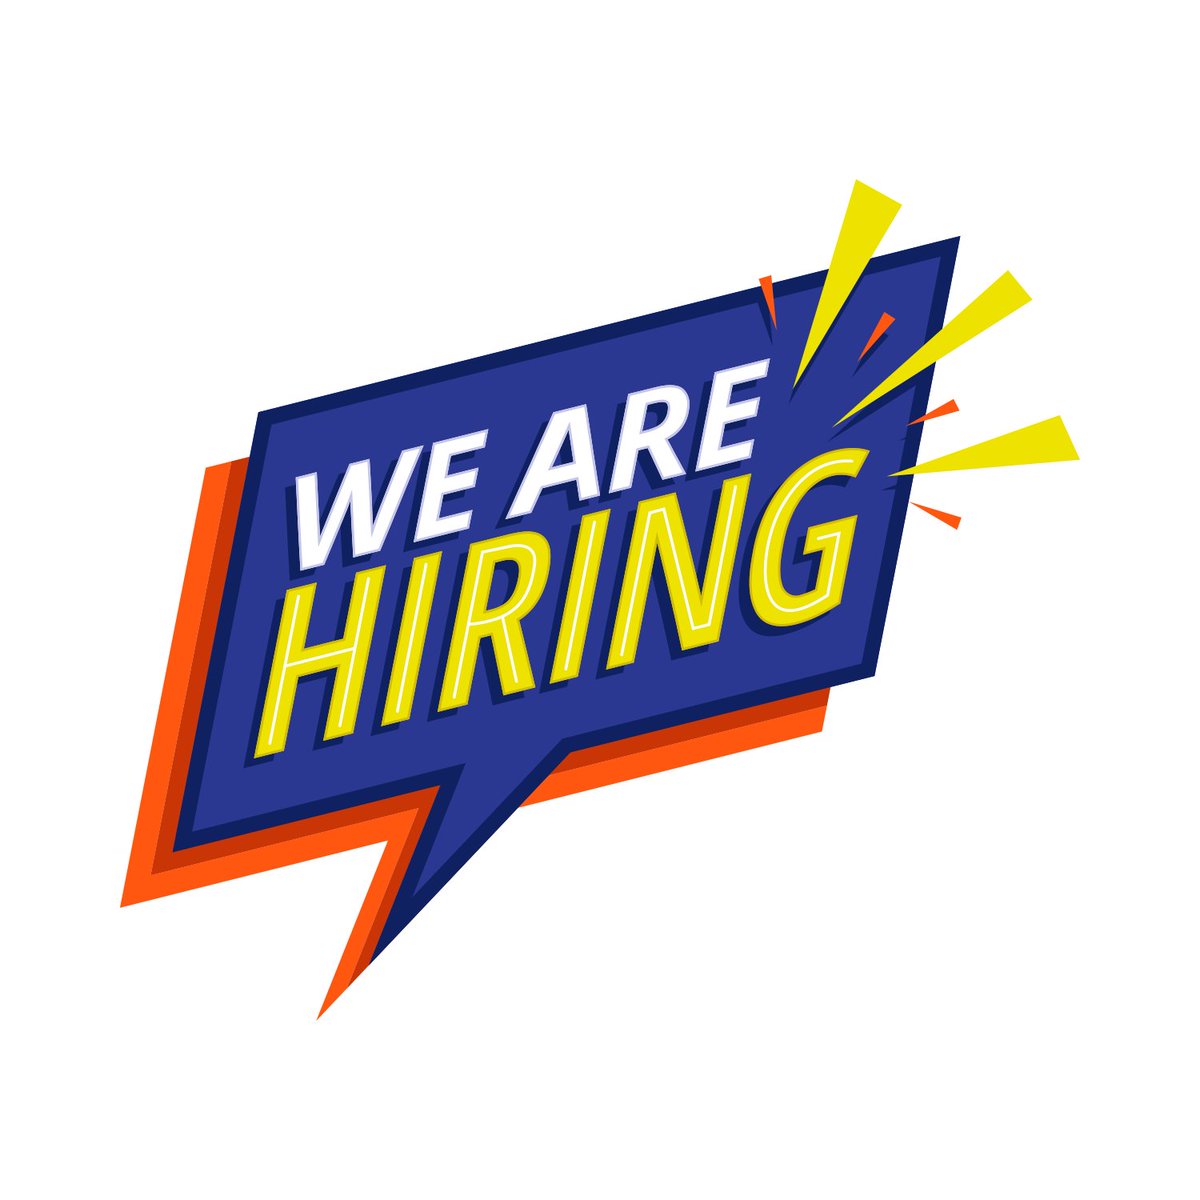 Come work with us! We have an opening for a Library Manager 2 for Children’s Services. This position manages the Children’s Department at the Main Library. Learn more: governmentjobs.com/careers/nashvi…?